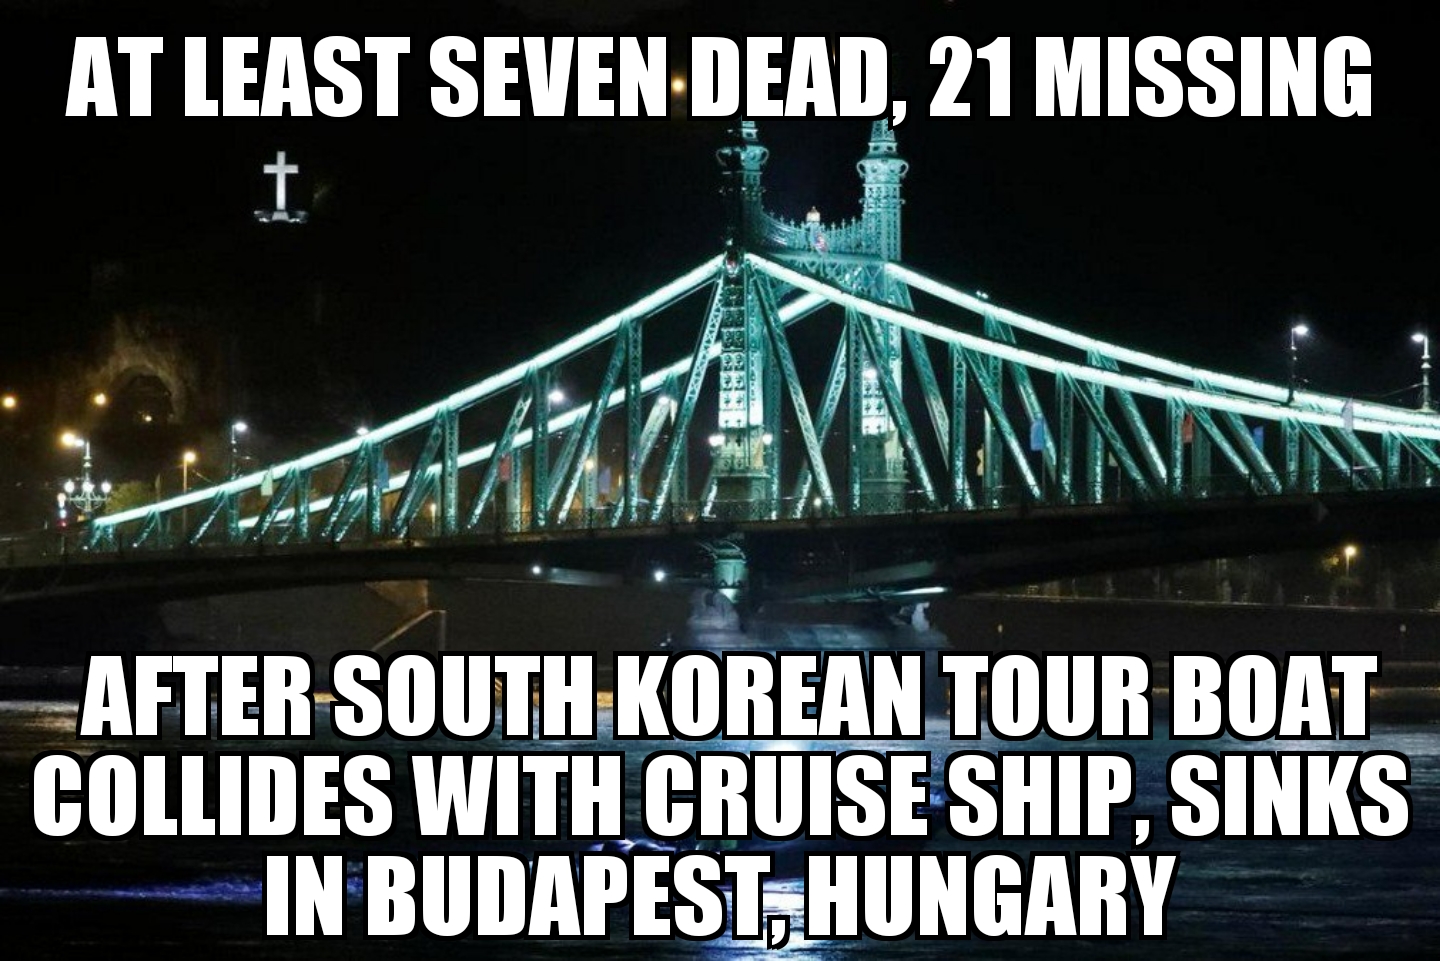 Tour boat sinks in Budapest, Hungary